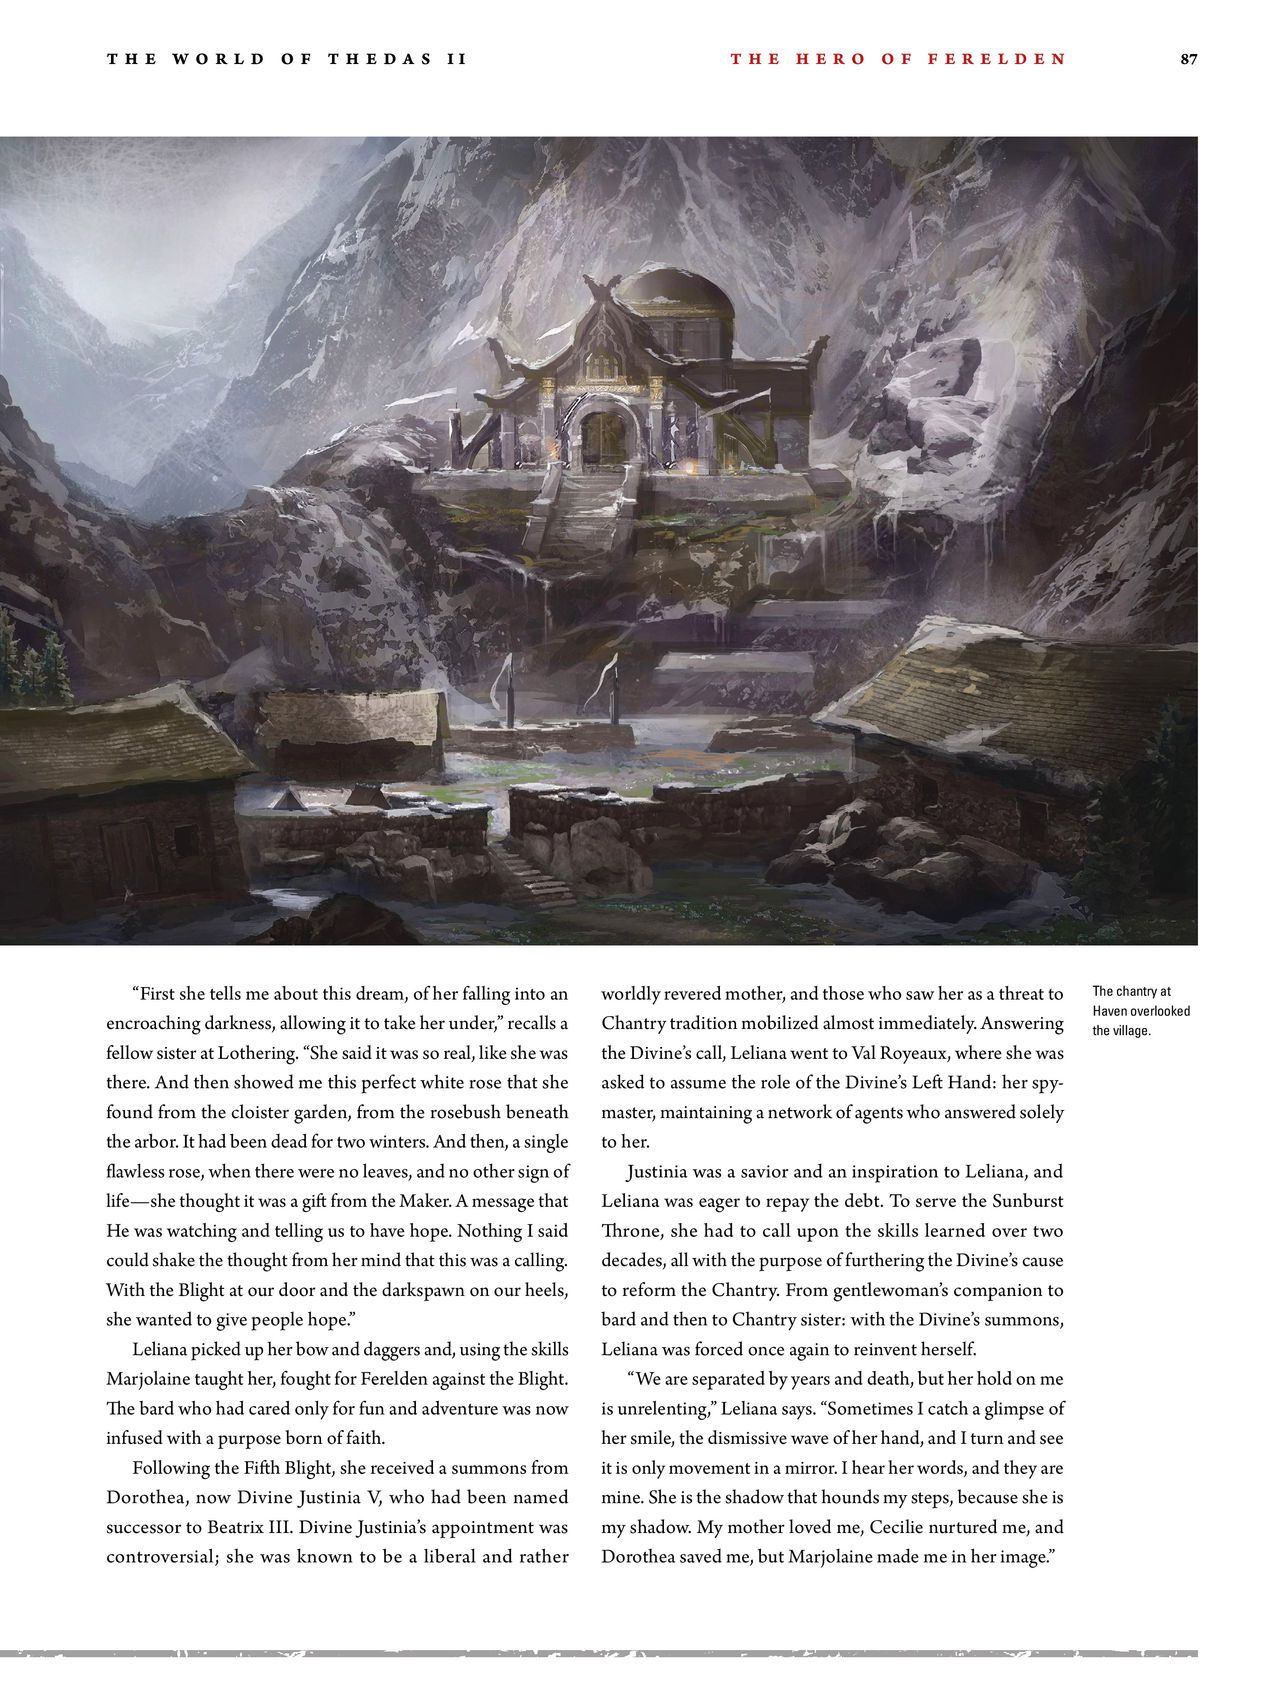 Dragon Age - The World of Thedas v02 83